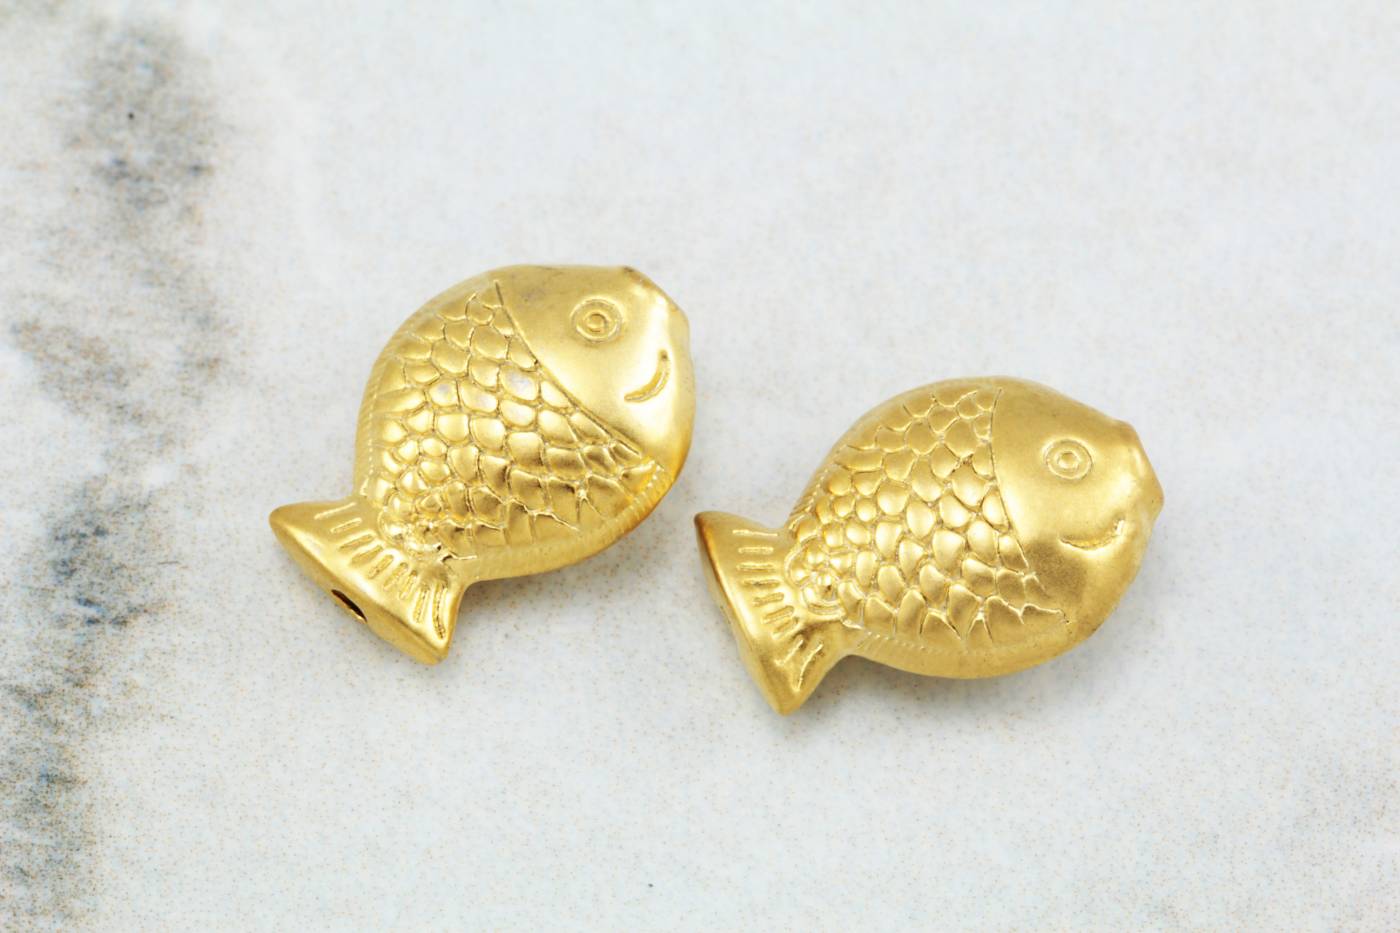 Free Ship 190 pieces gold plated fish charms 11x9mm #171 